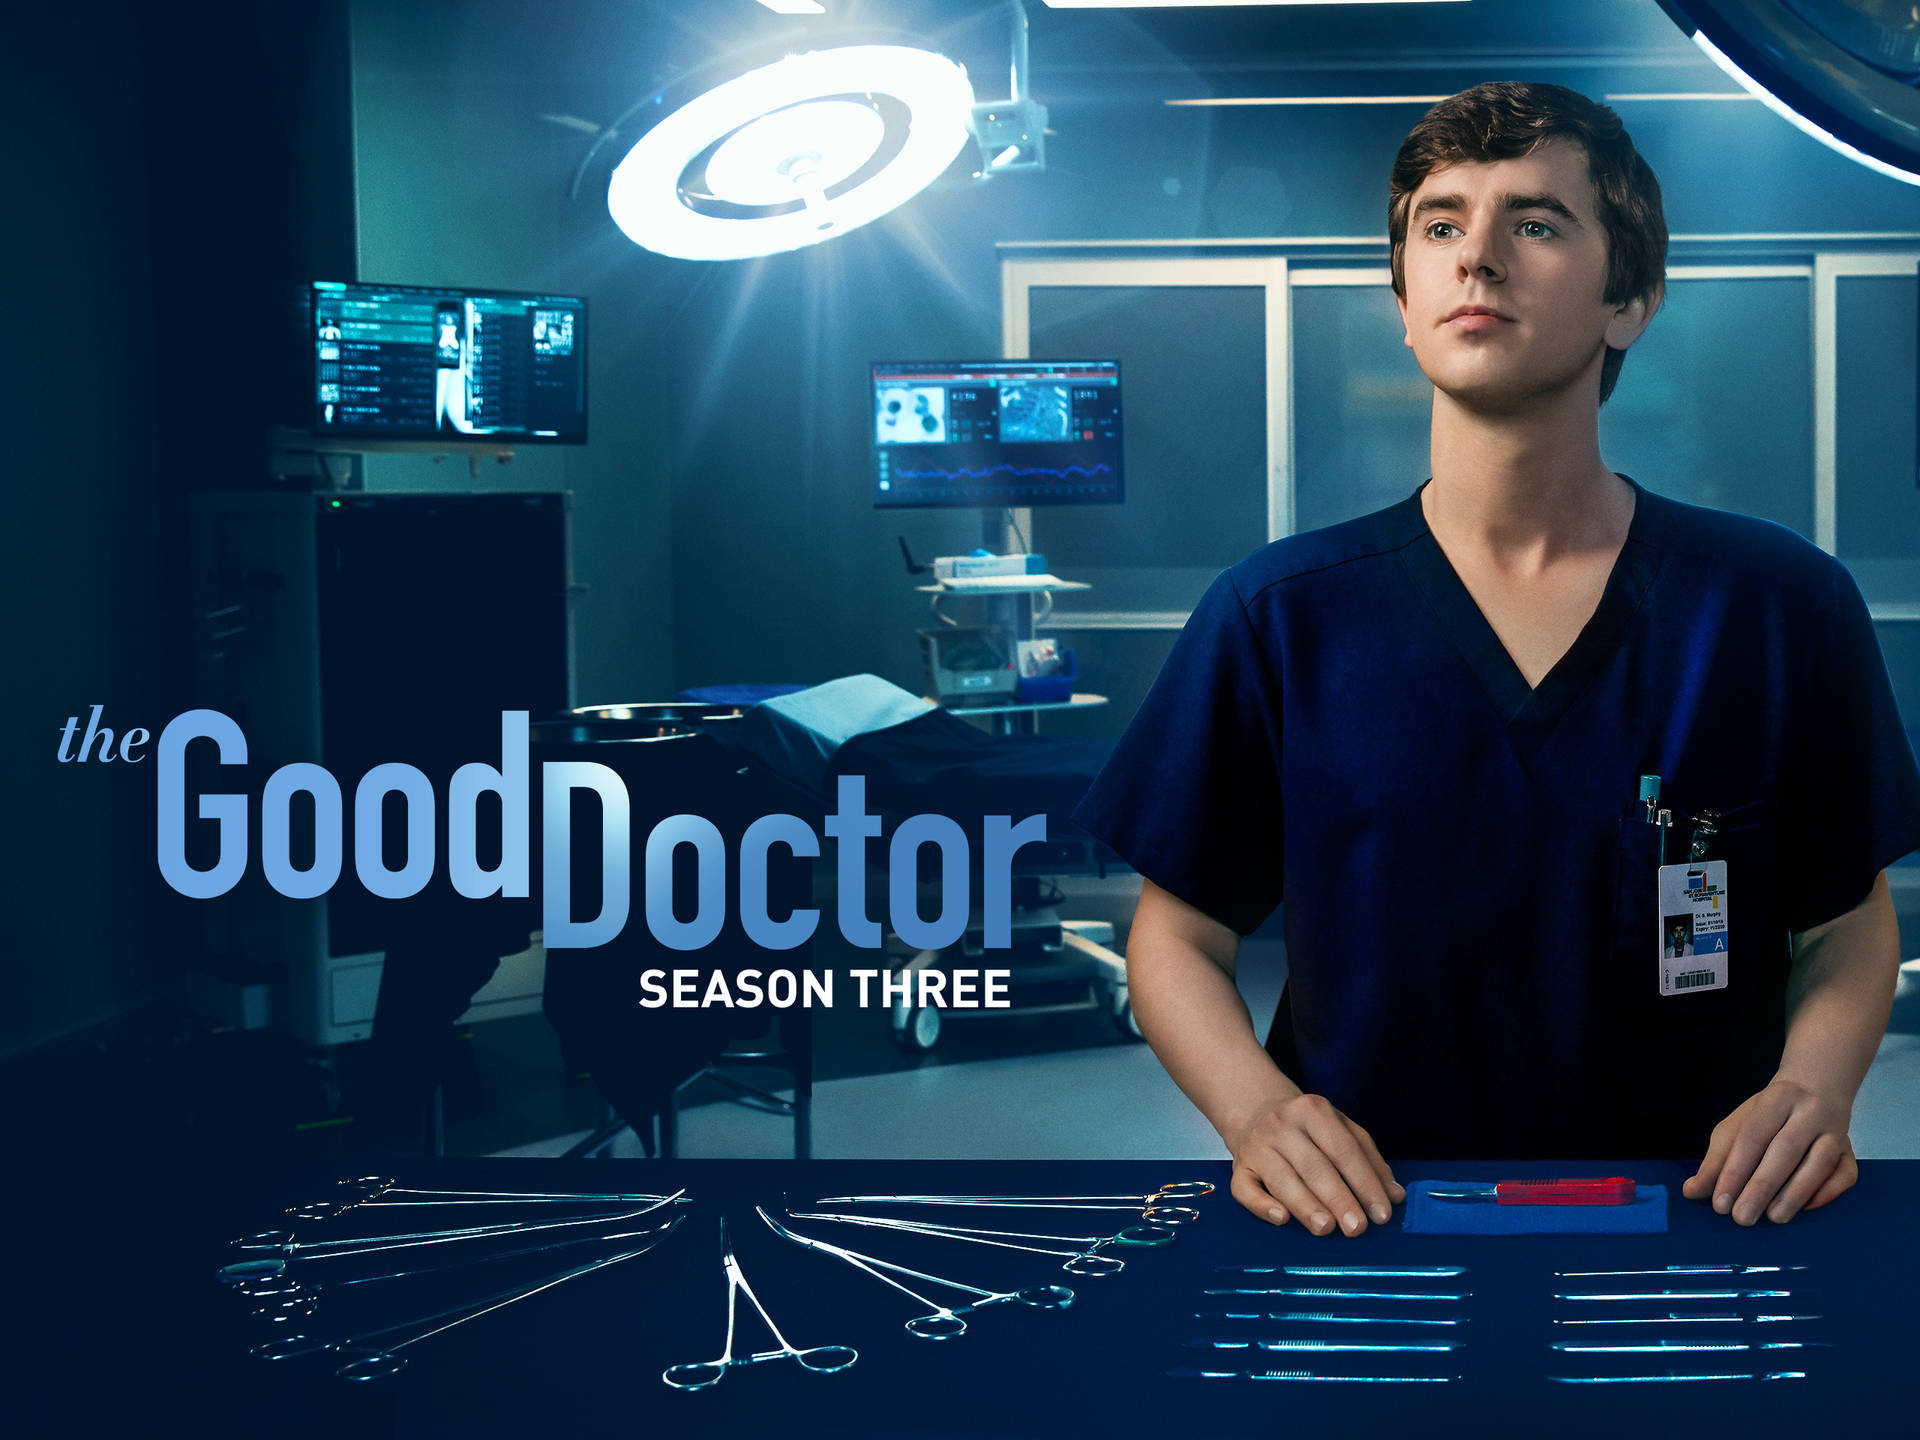 The Good Doctor Freddie Highmore Cover Background